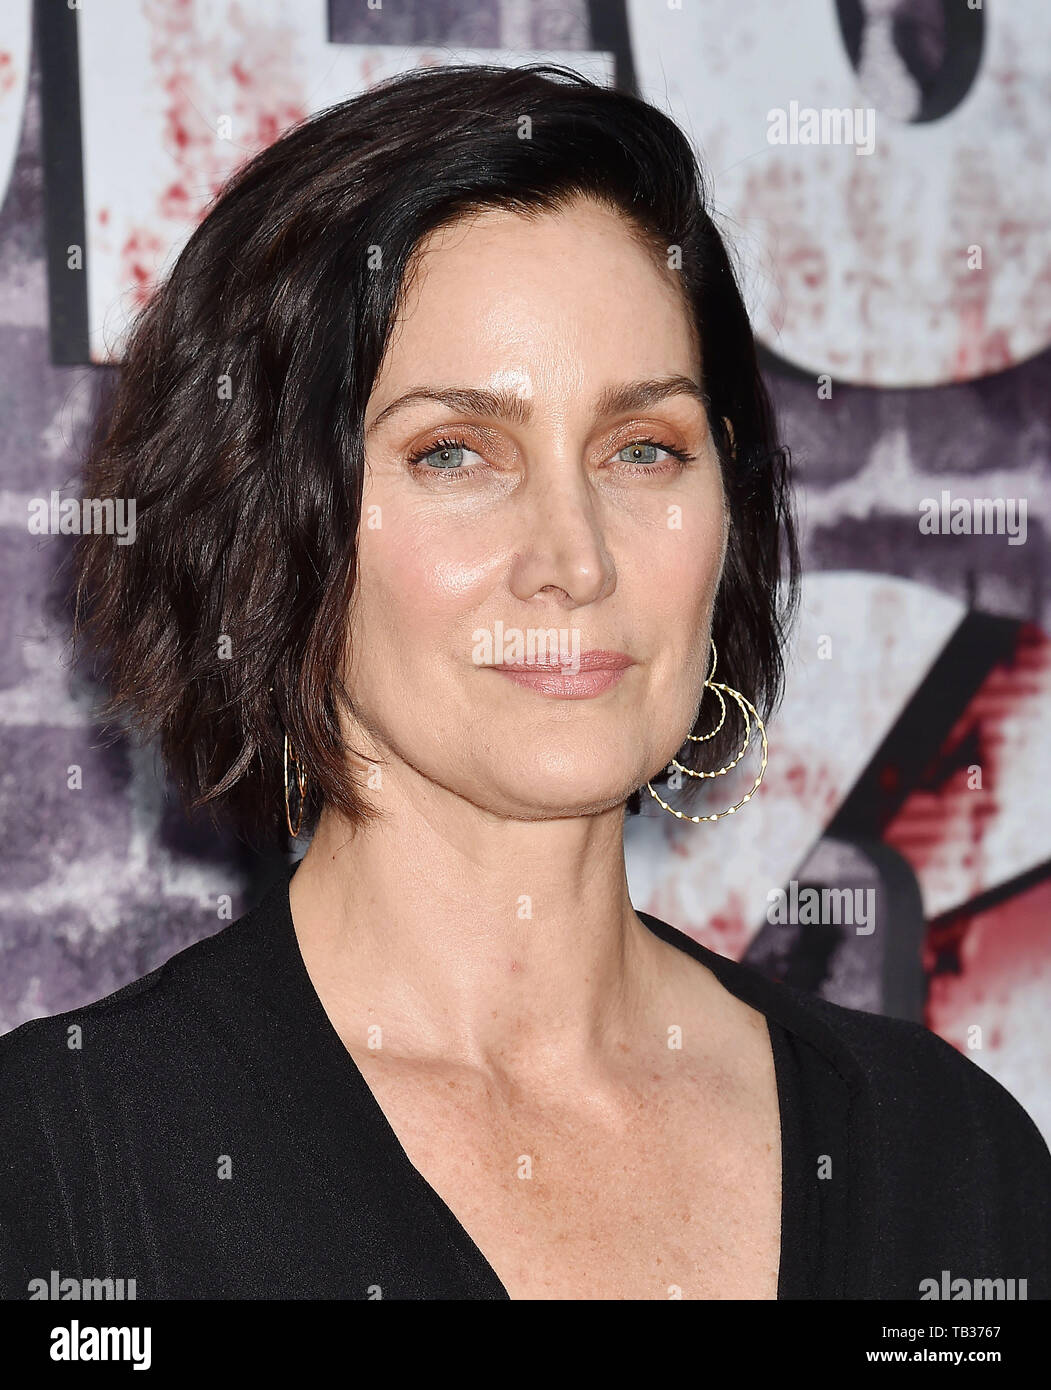 Carrie Anne Moss Hairstyles